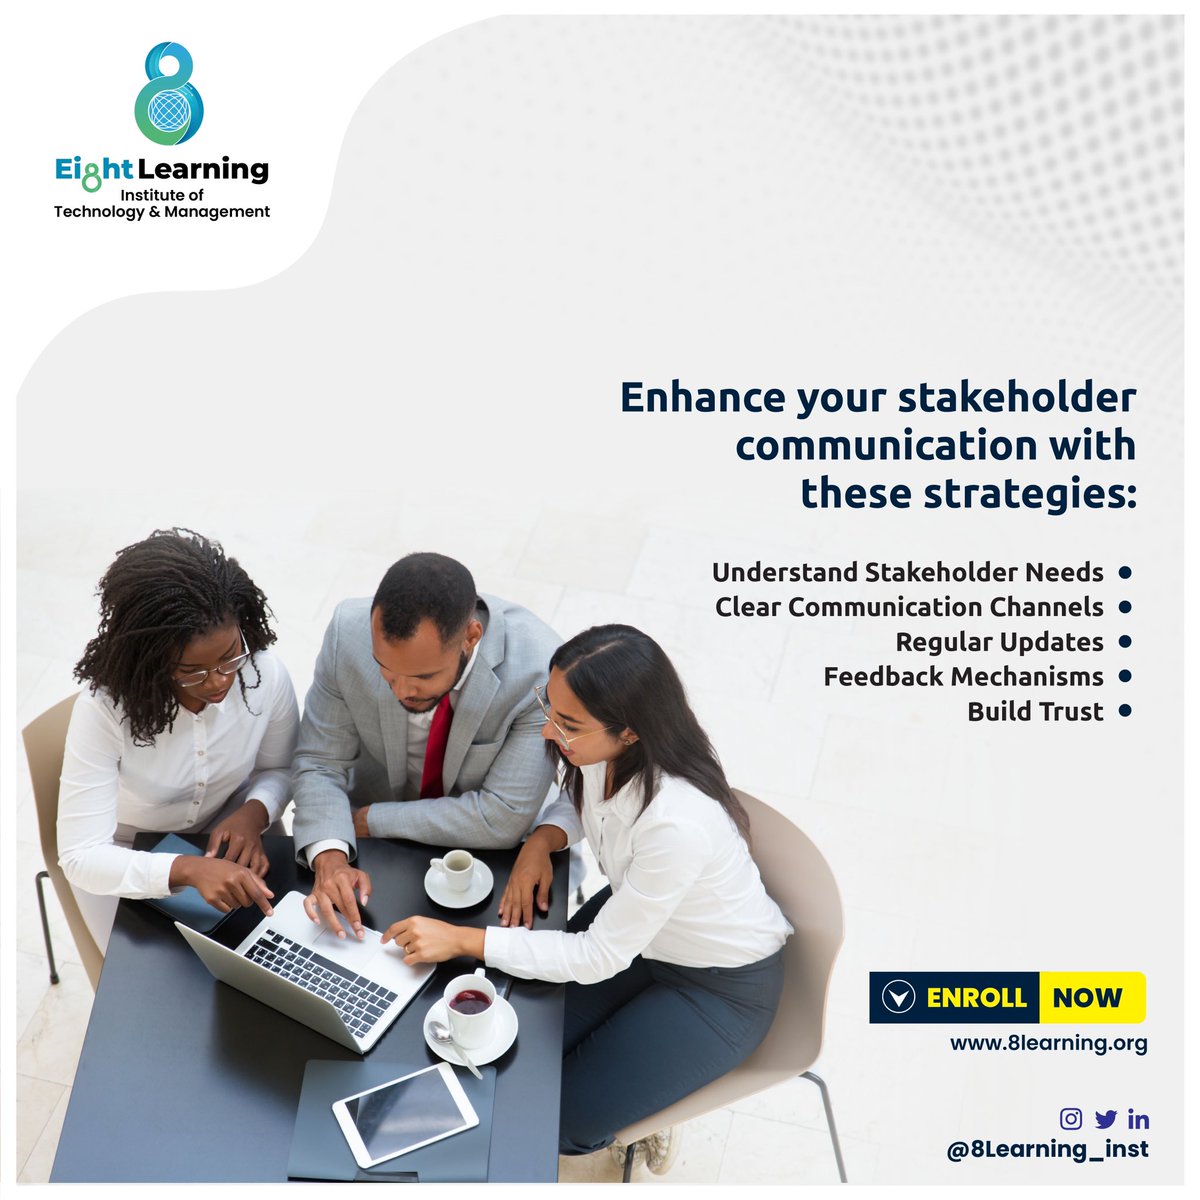 Master stakeholder communication for project success with these strategies:
📍 Understand their needs
📍 Use clear channels
📍 Feedback loops
📍 Regular updates
📍 Build trust

For more insights, sign up for our Stakeholder Management course here 👉🏾 bit.ly/8tech3